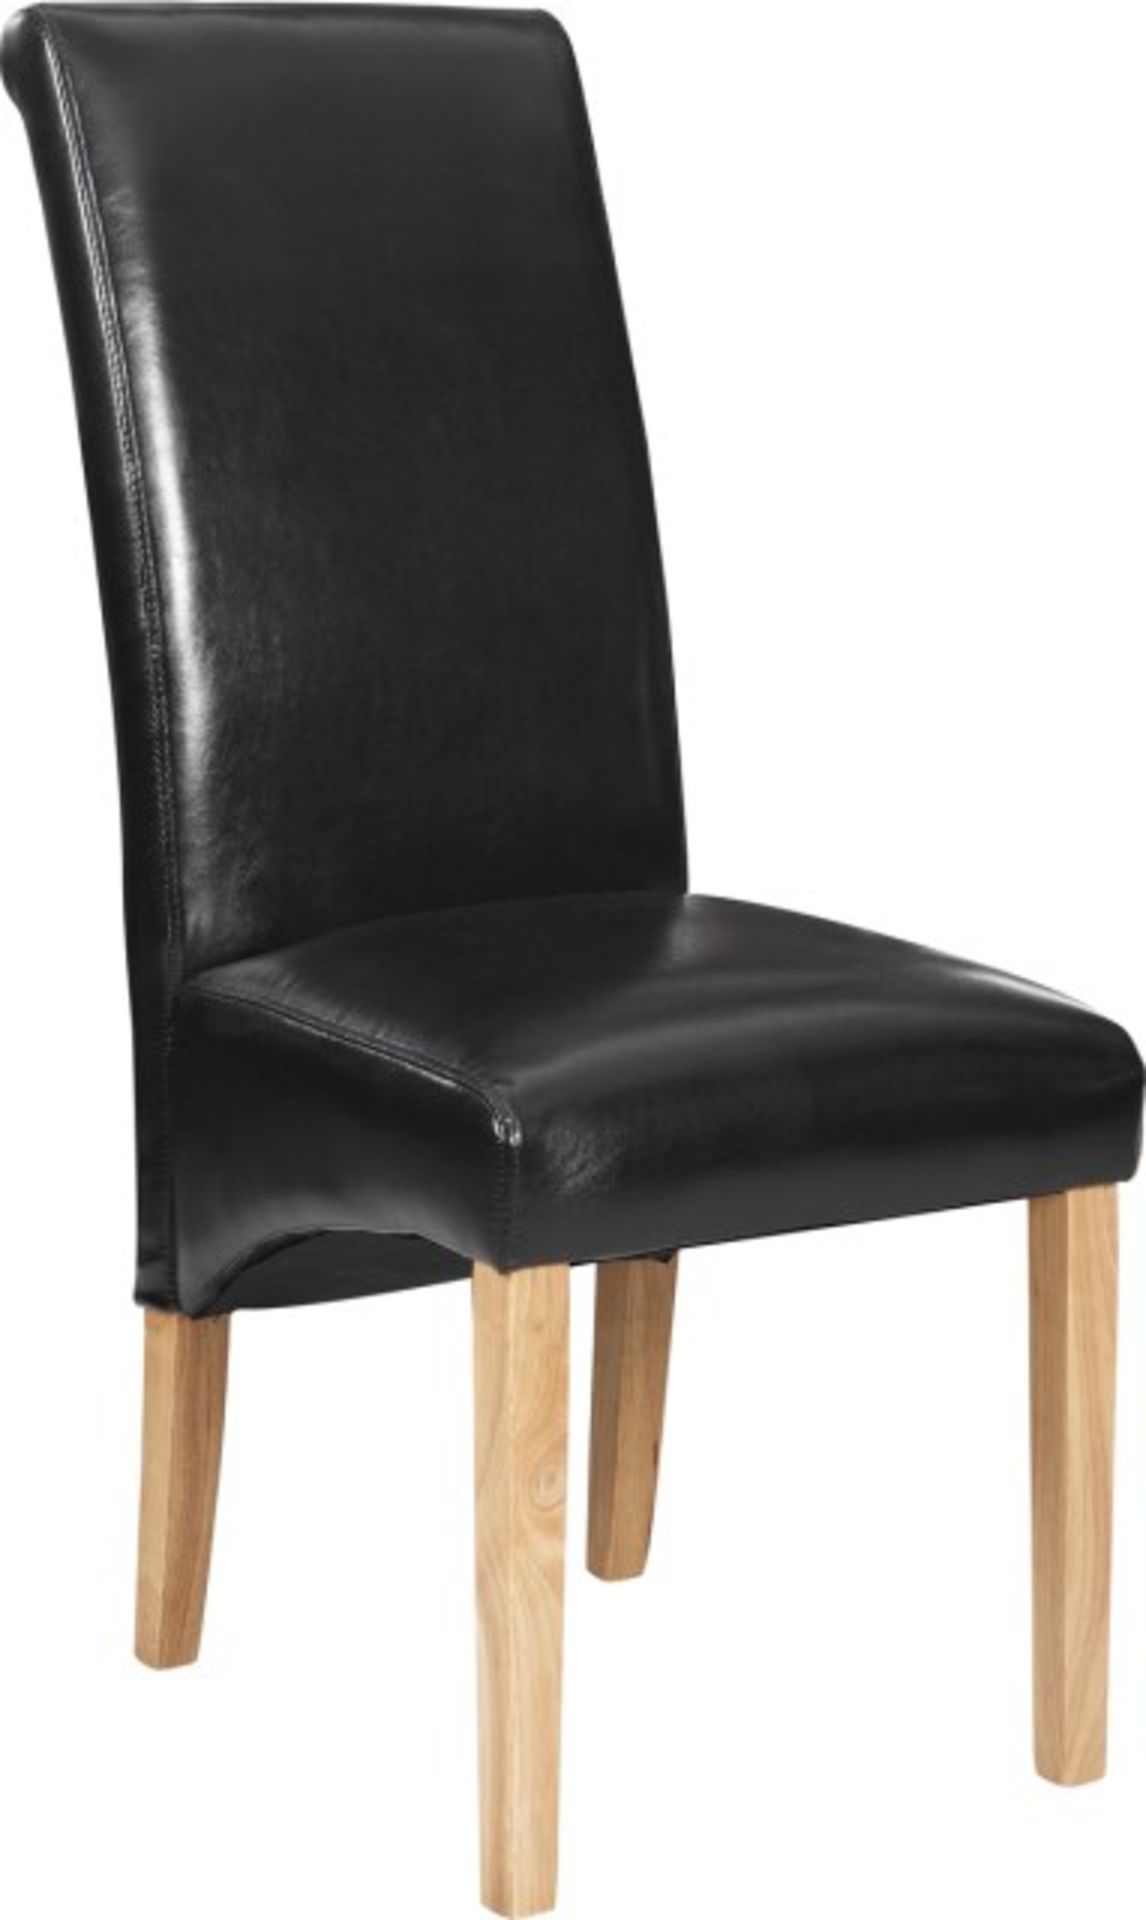 V Grade A Black PU Leather Dining Chair - Image 2 of 2